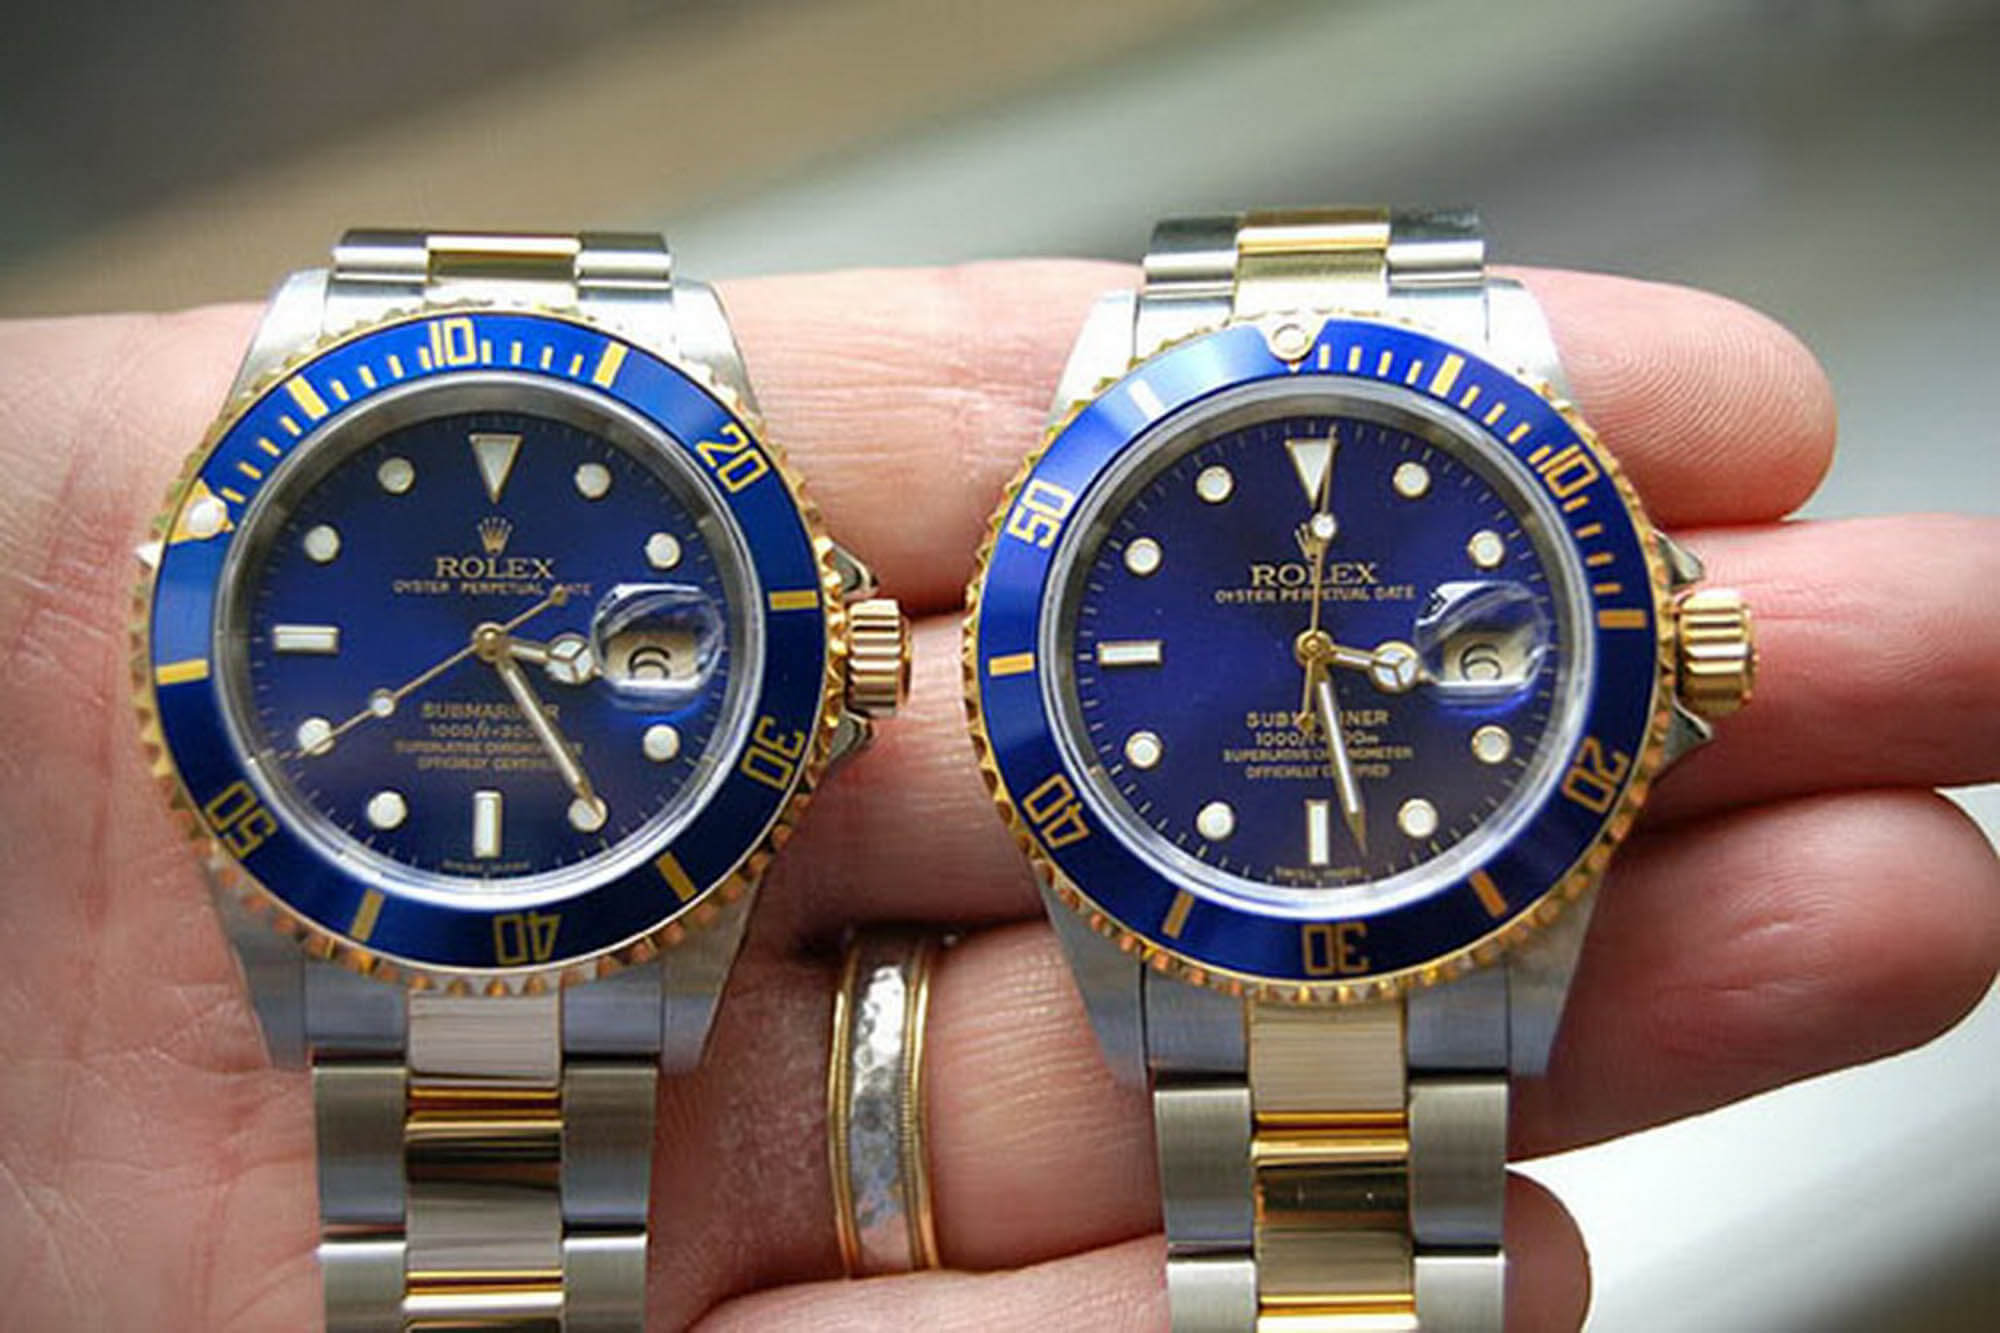 Fake Rolex Watches - How To Spot Them & Compare To The Real Watch